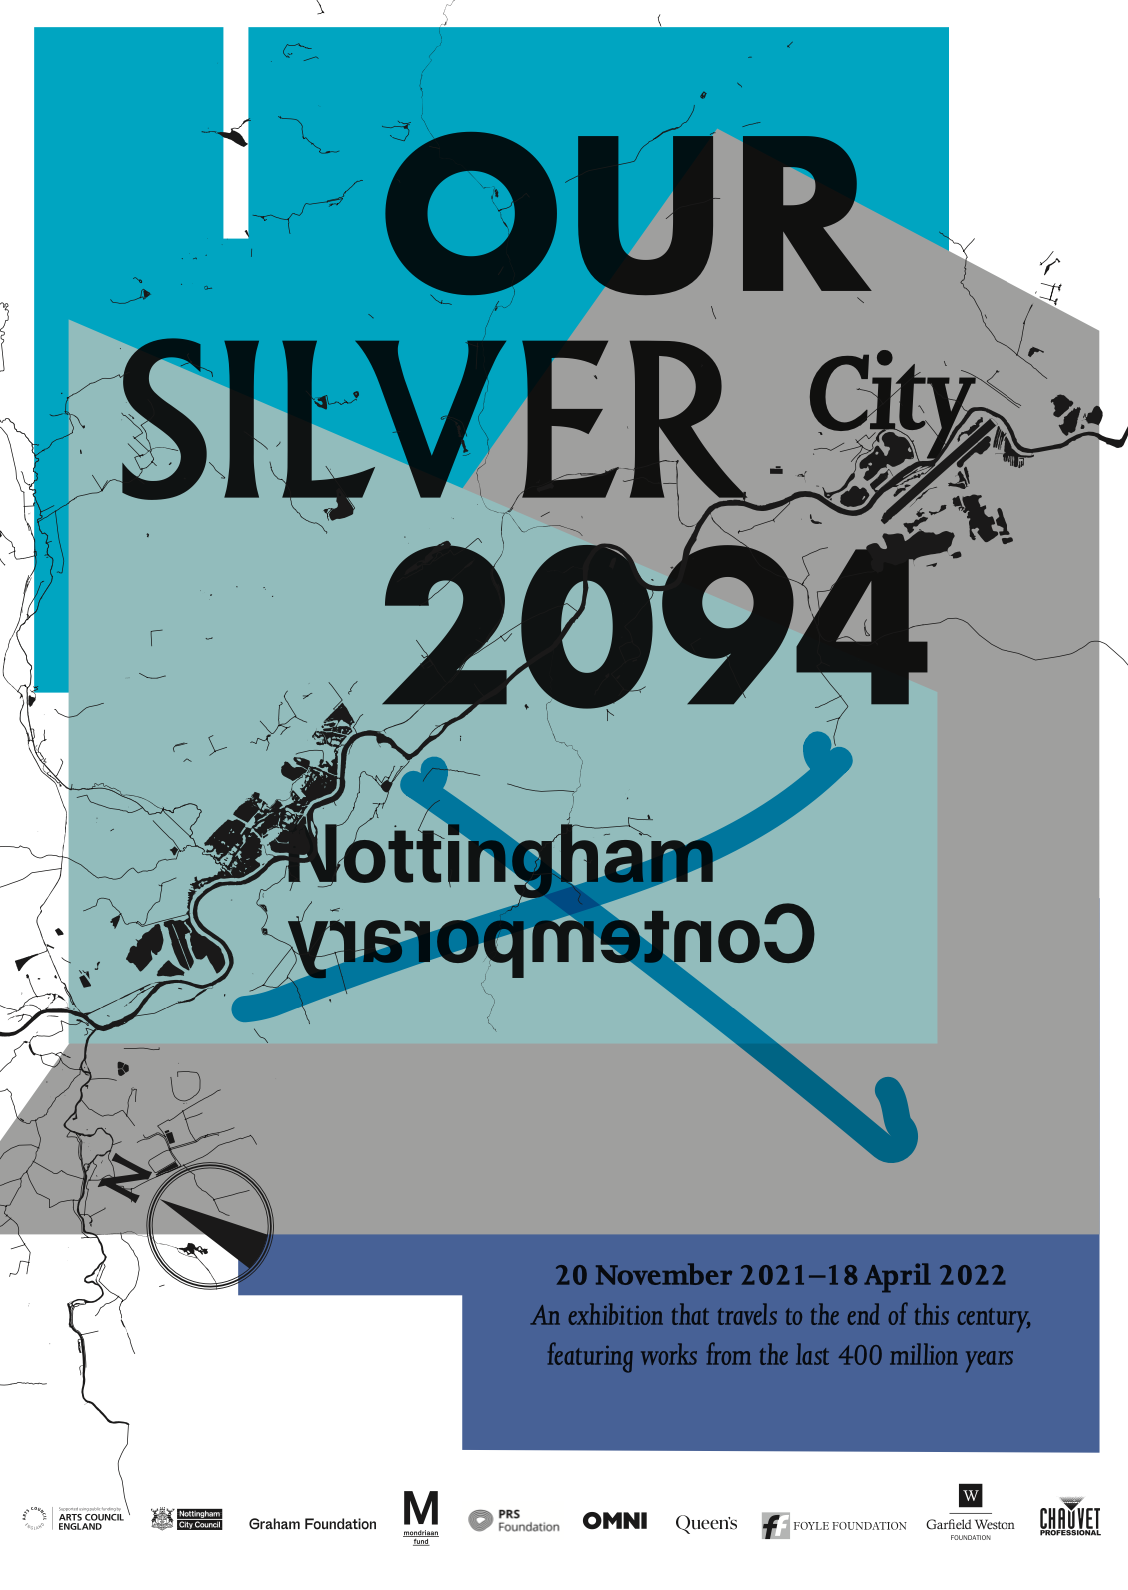 Our Silver City, 2094 Easy Read Exhibition Guide Nottingham